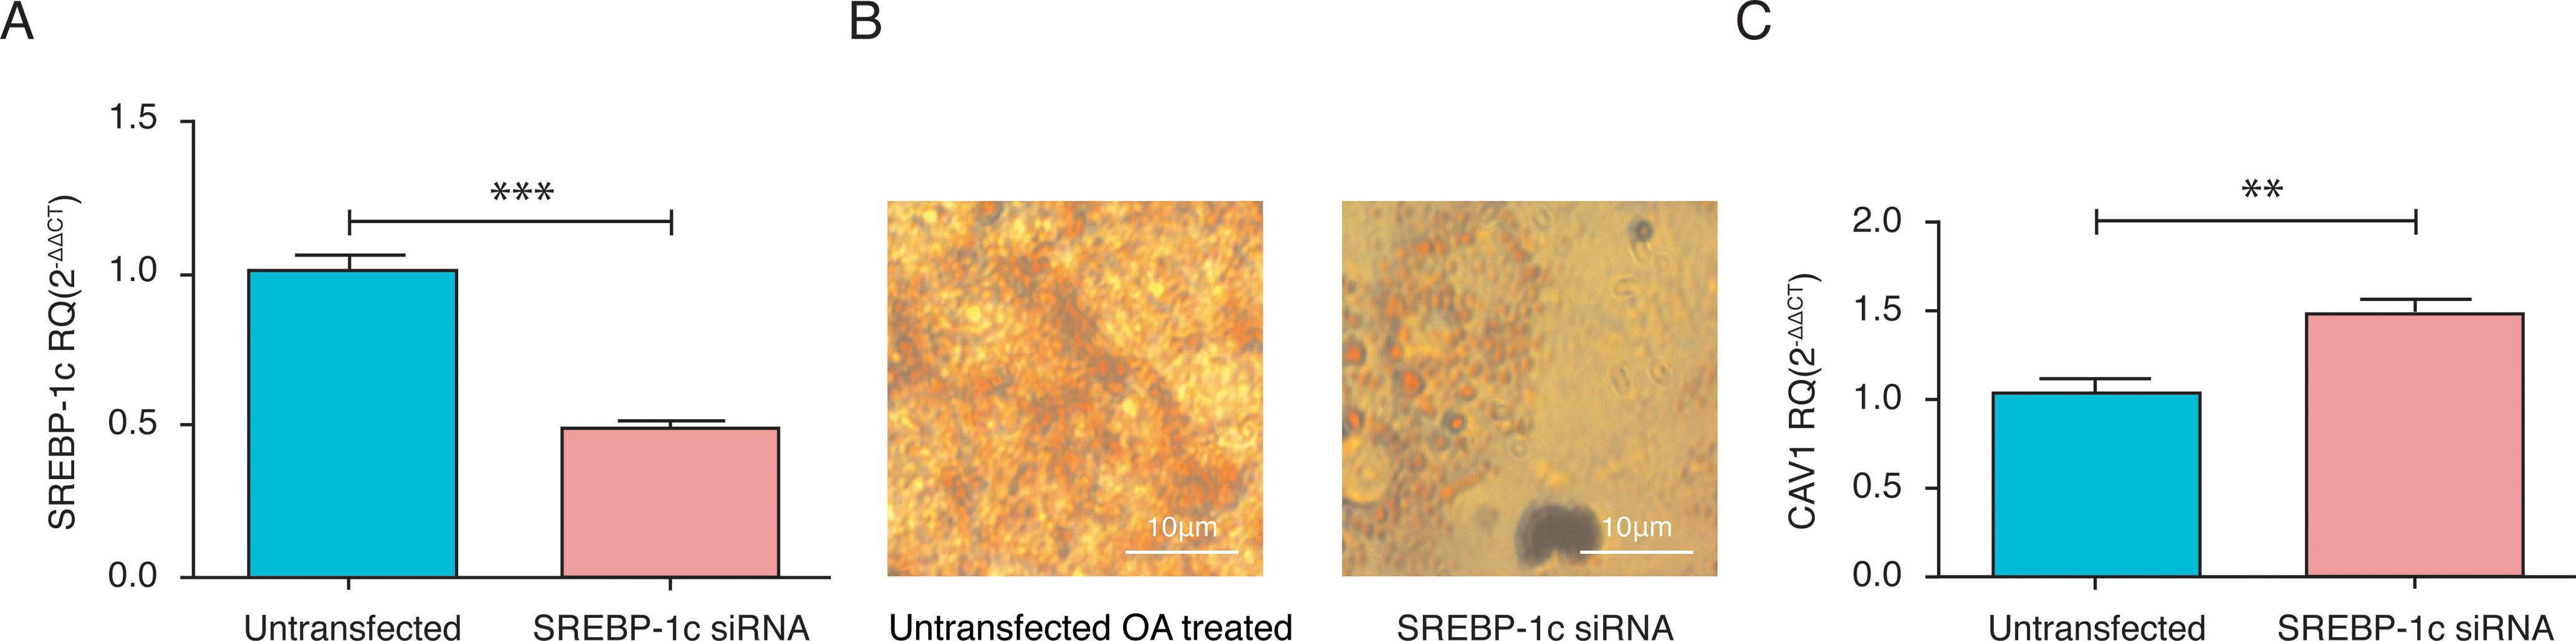 Impact of SREBP-1c siRNA on lipid droplet (LD) formation and CAV1 expression.